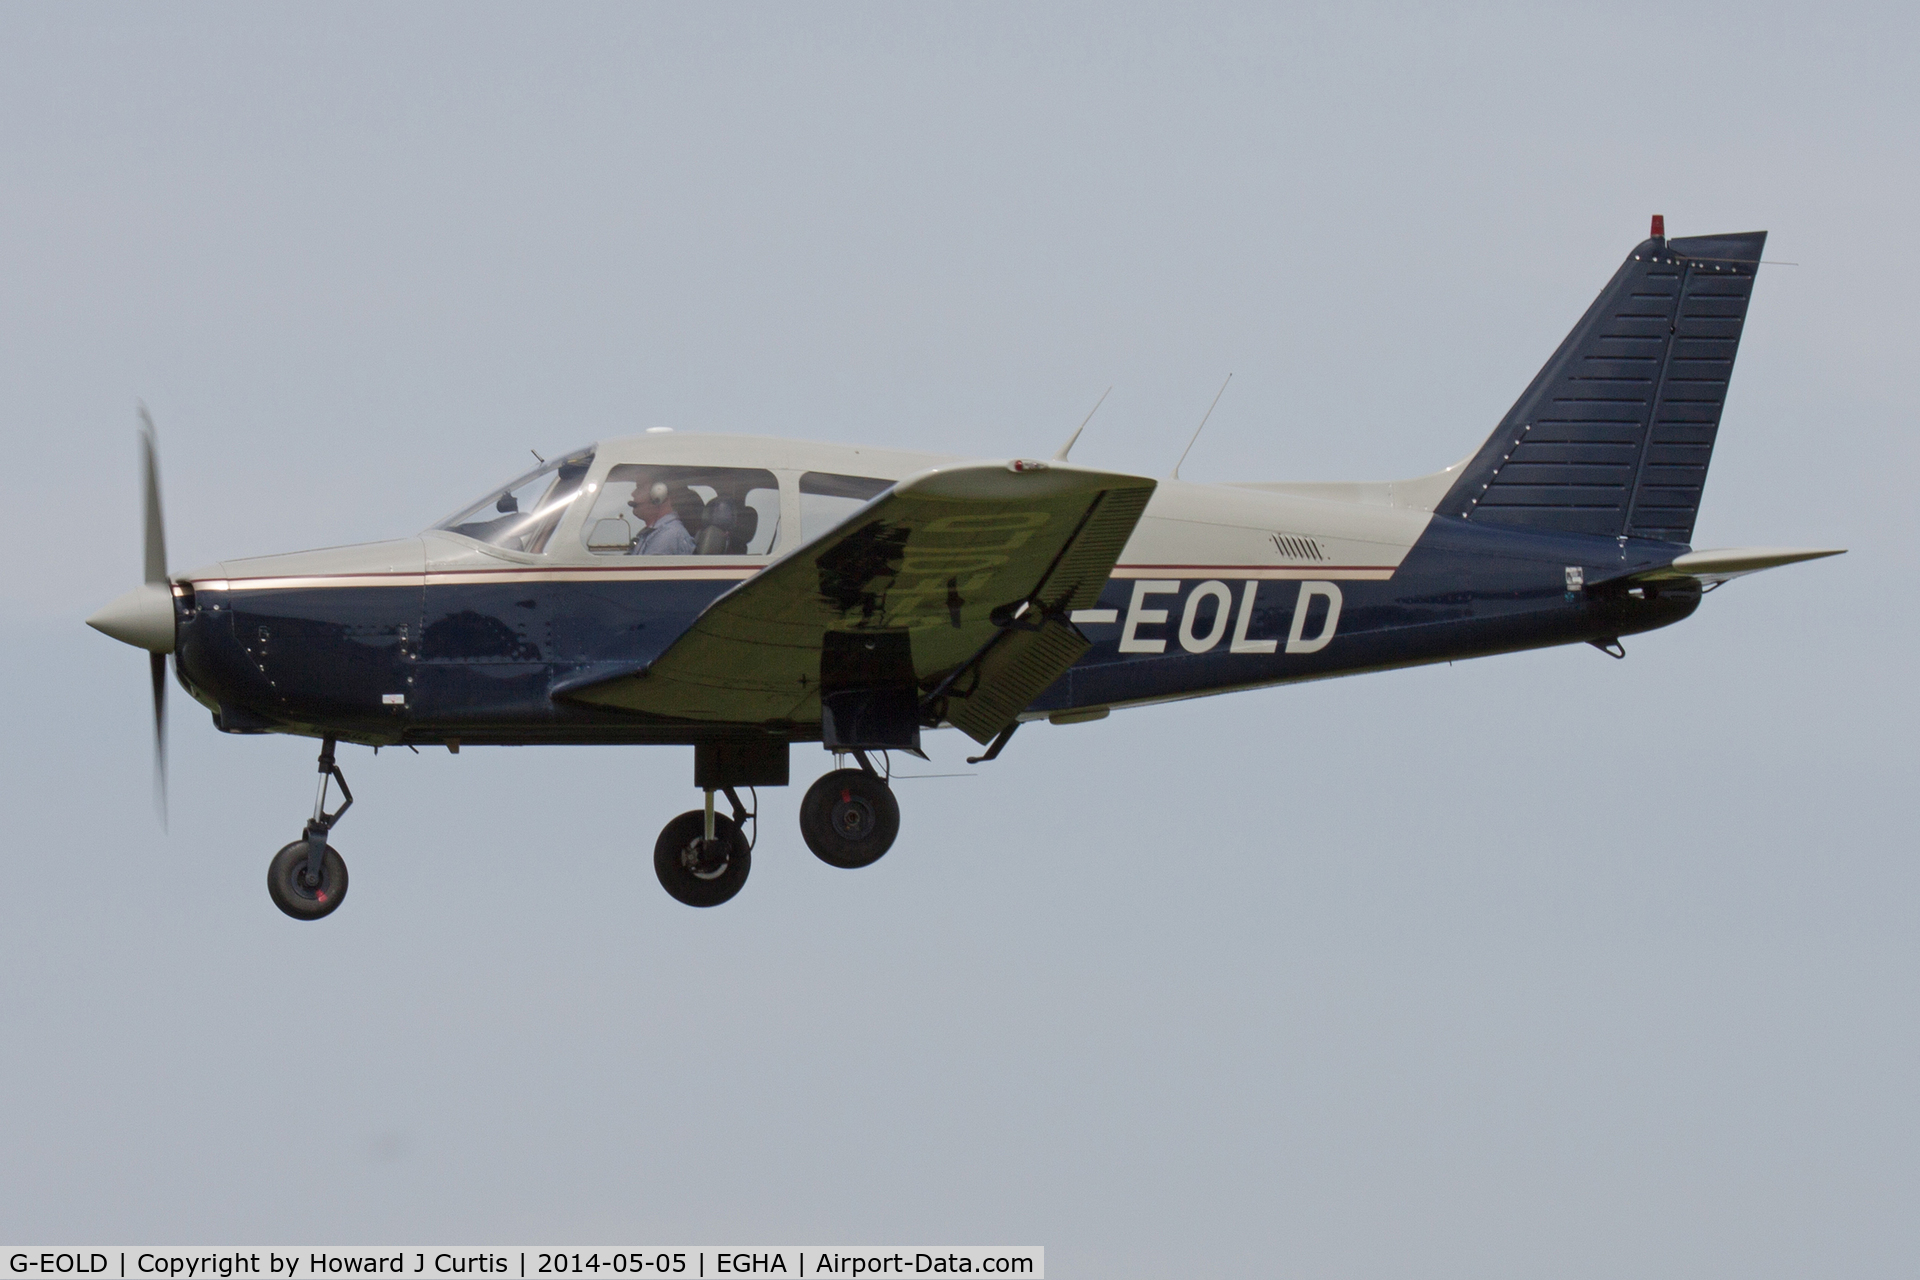 G-EOLD, 1985 Piper PA-28-161 Cherokee Warrior II C/N 28-8516030, Privately owned